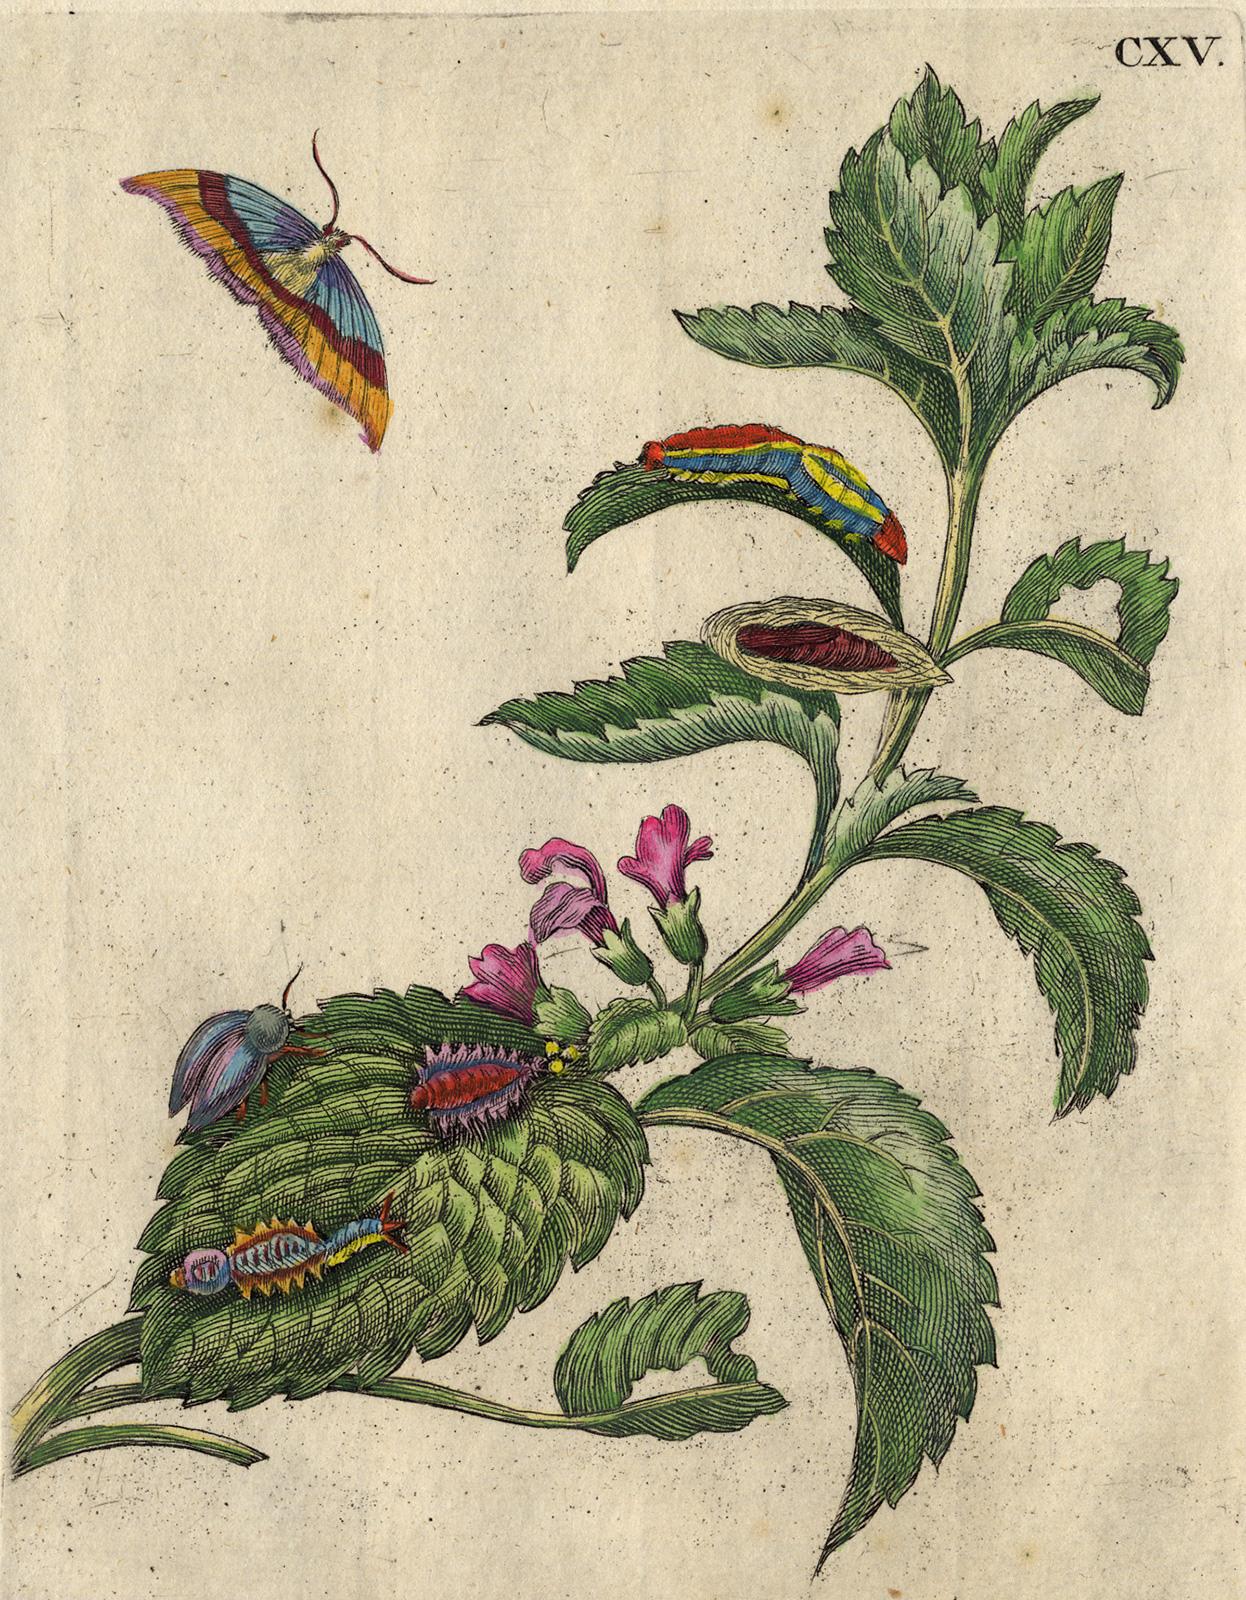 Melissa and Balm with insects by Merian - Handcoloured engraving - 18th century - Print by Maria Sybilla Merian